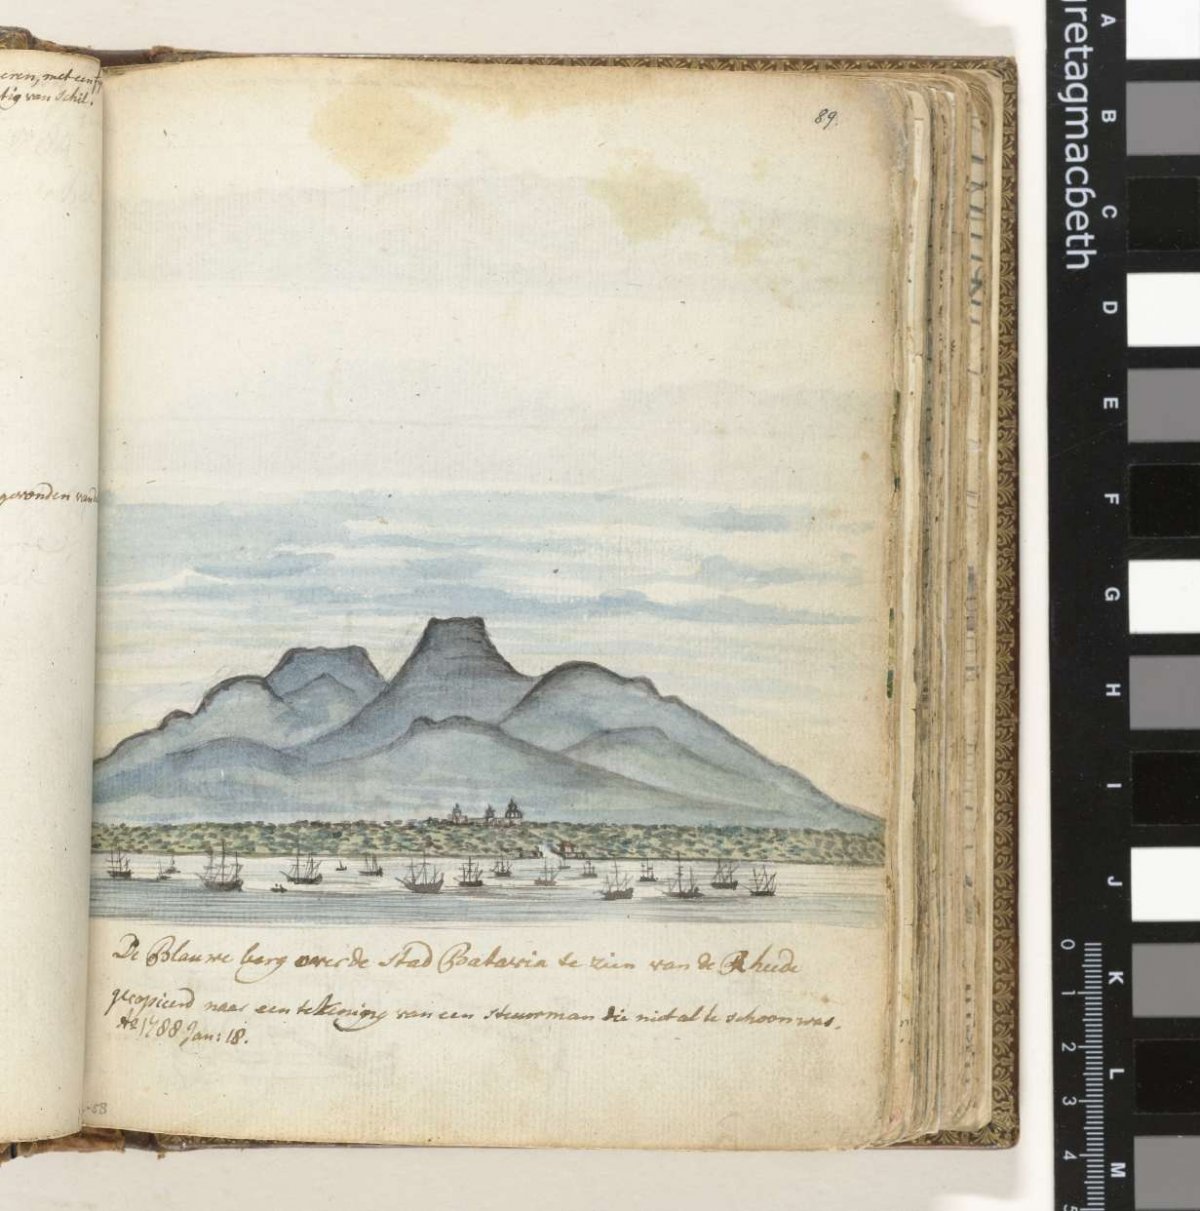 The Blue Mountain over the city of Batavia to be seen from the Rheede, Jan Brandes, 1788